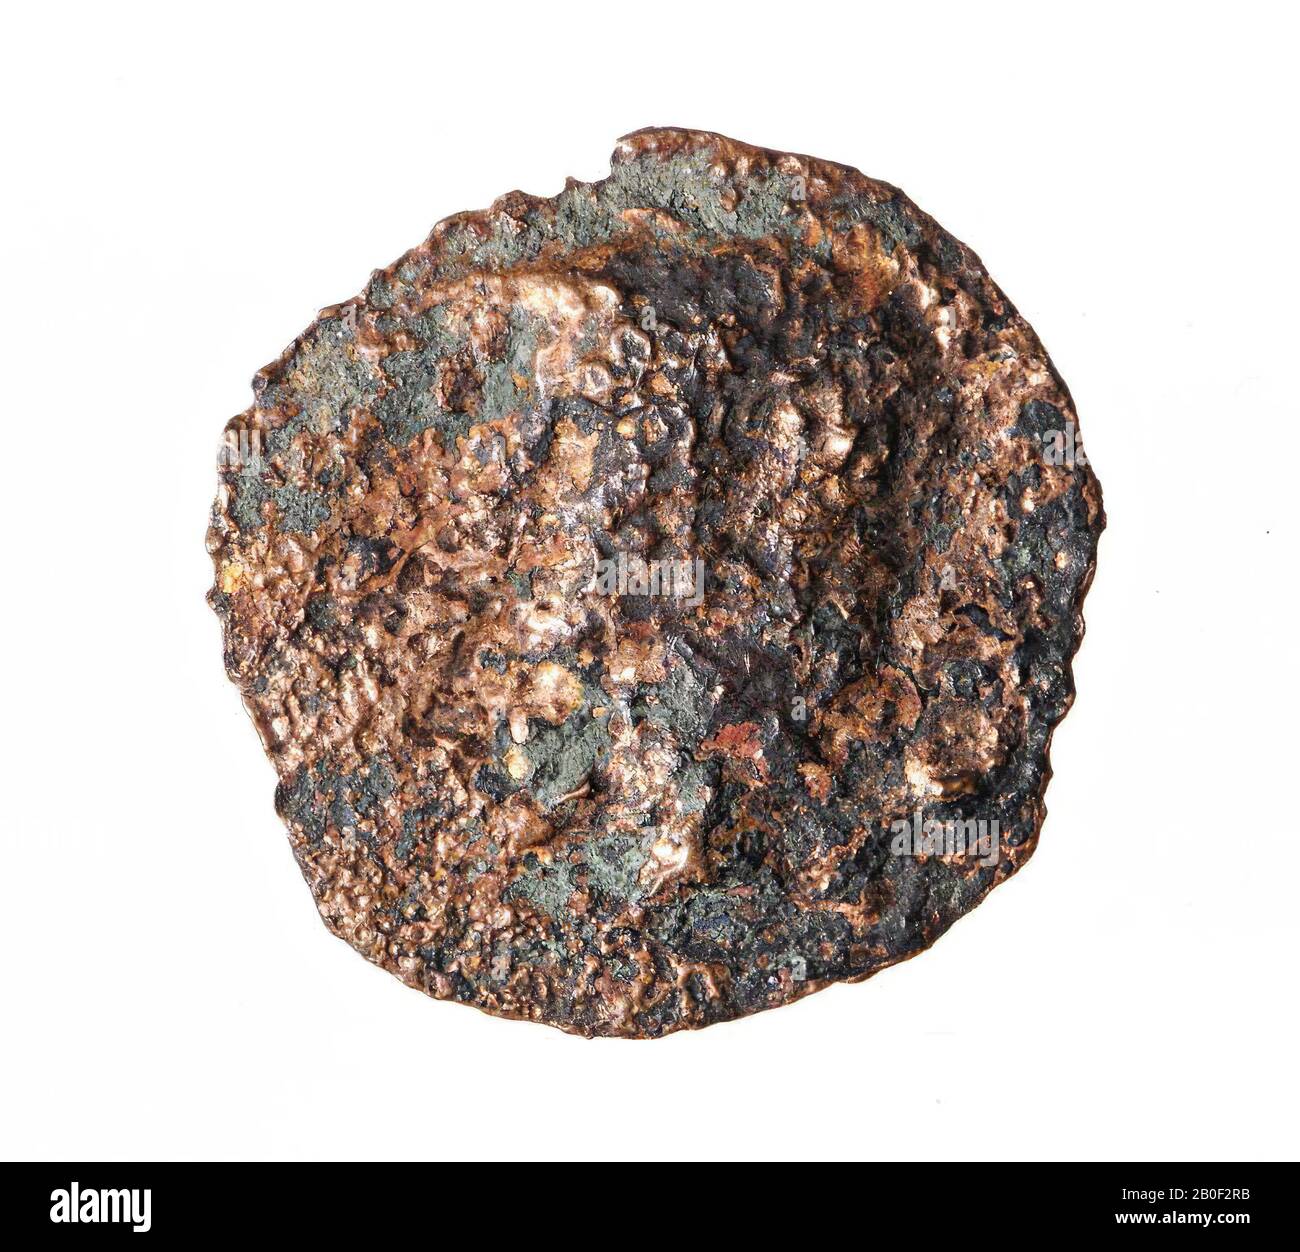 Vz: heading n.l., Kz: S C with text all around, coin, axis, Caligula, metal, copper, Diam. 25 mm, wt. 3,27 gr, roman 37-41, the Netherlands, South Holland, Katwijk, Valkenburg Stock Photo